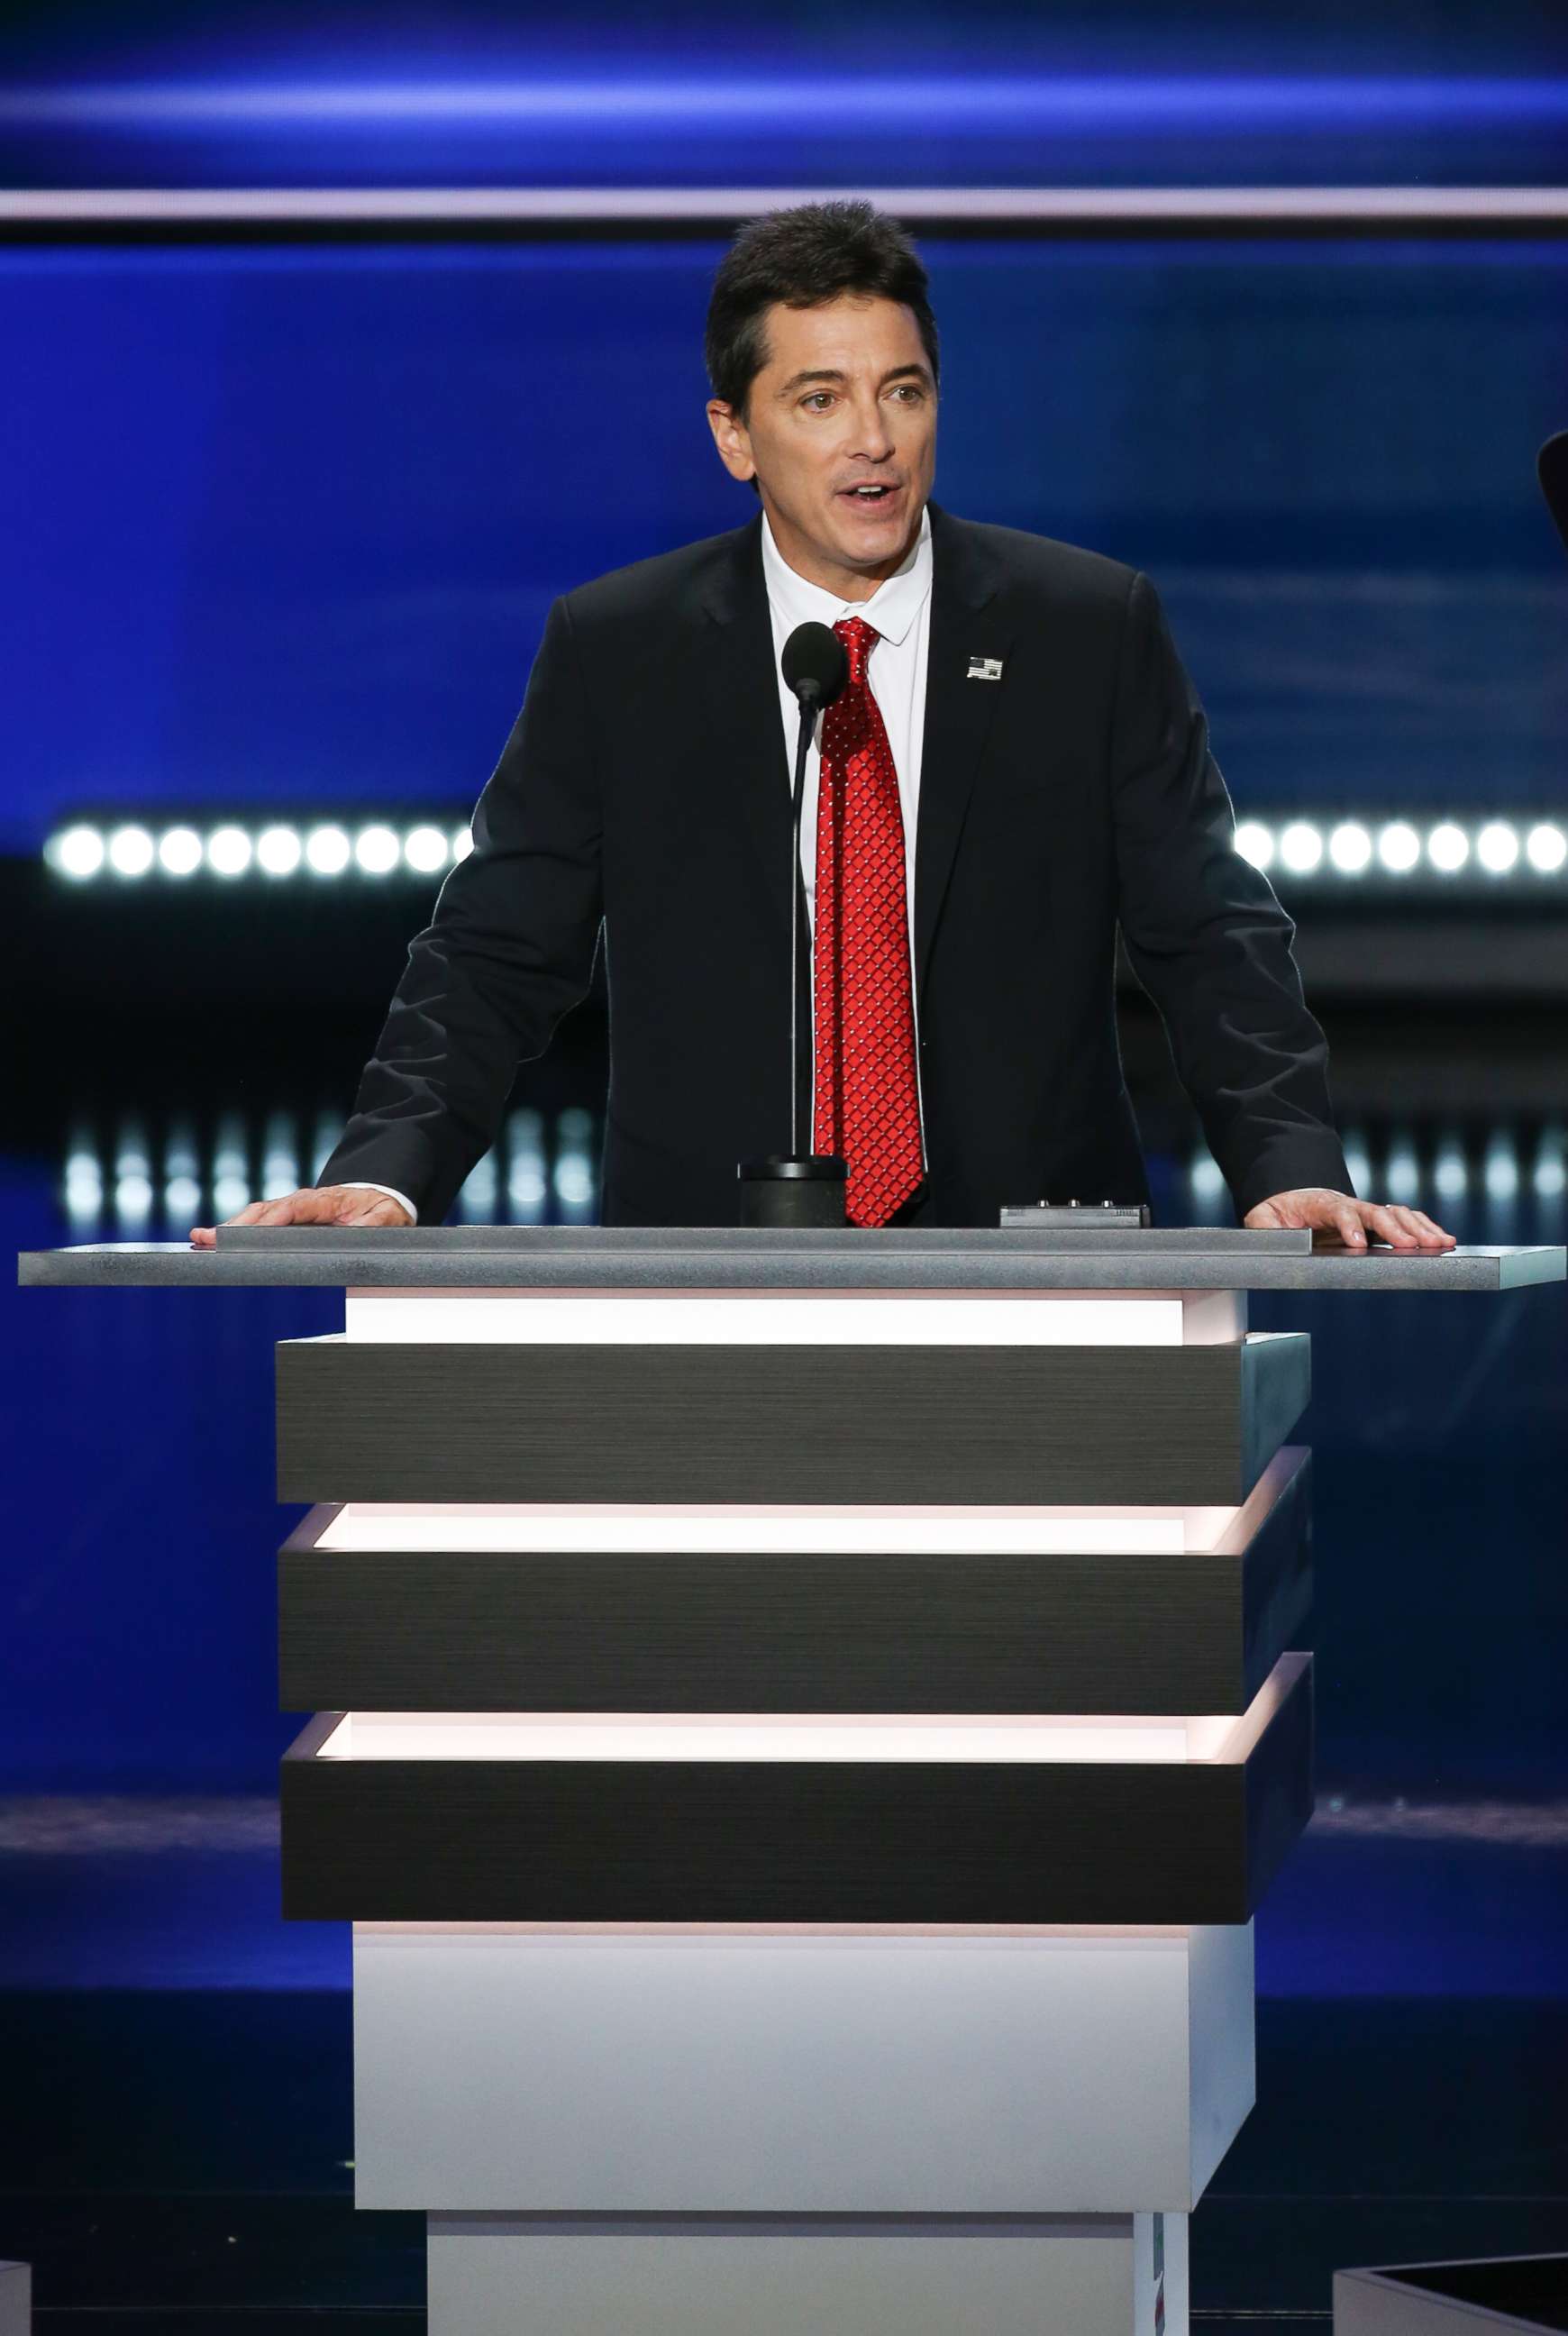 PHOTO: Scott Baio speaks during the first day of the Republican National Convention, July 18, 2016 at the Quicken Loans Arena in Cleveland, Ohio.